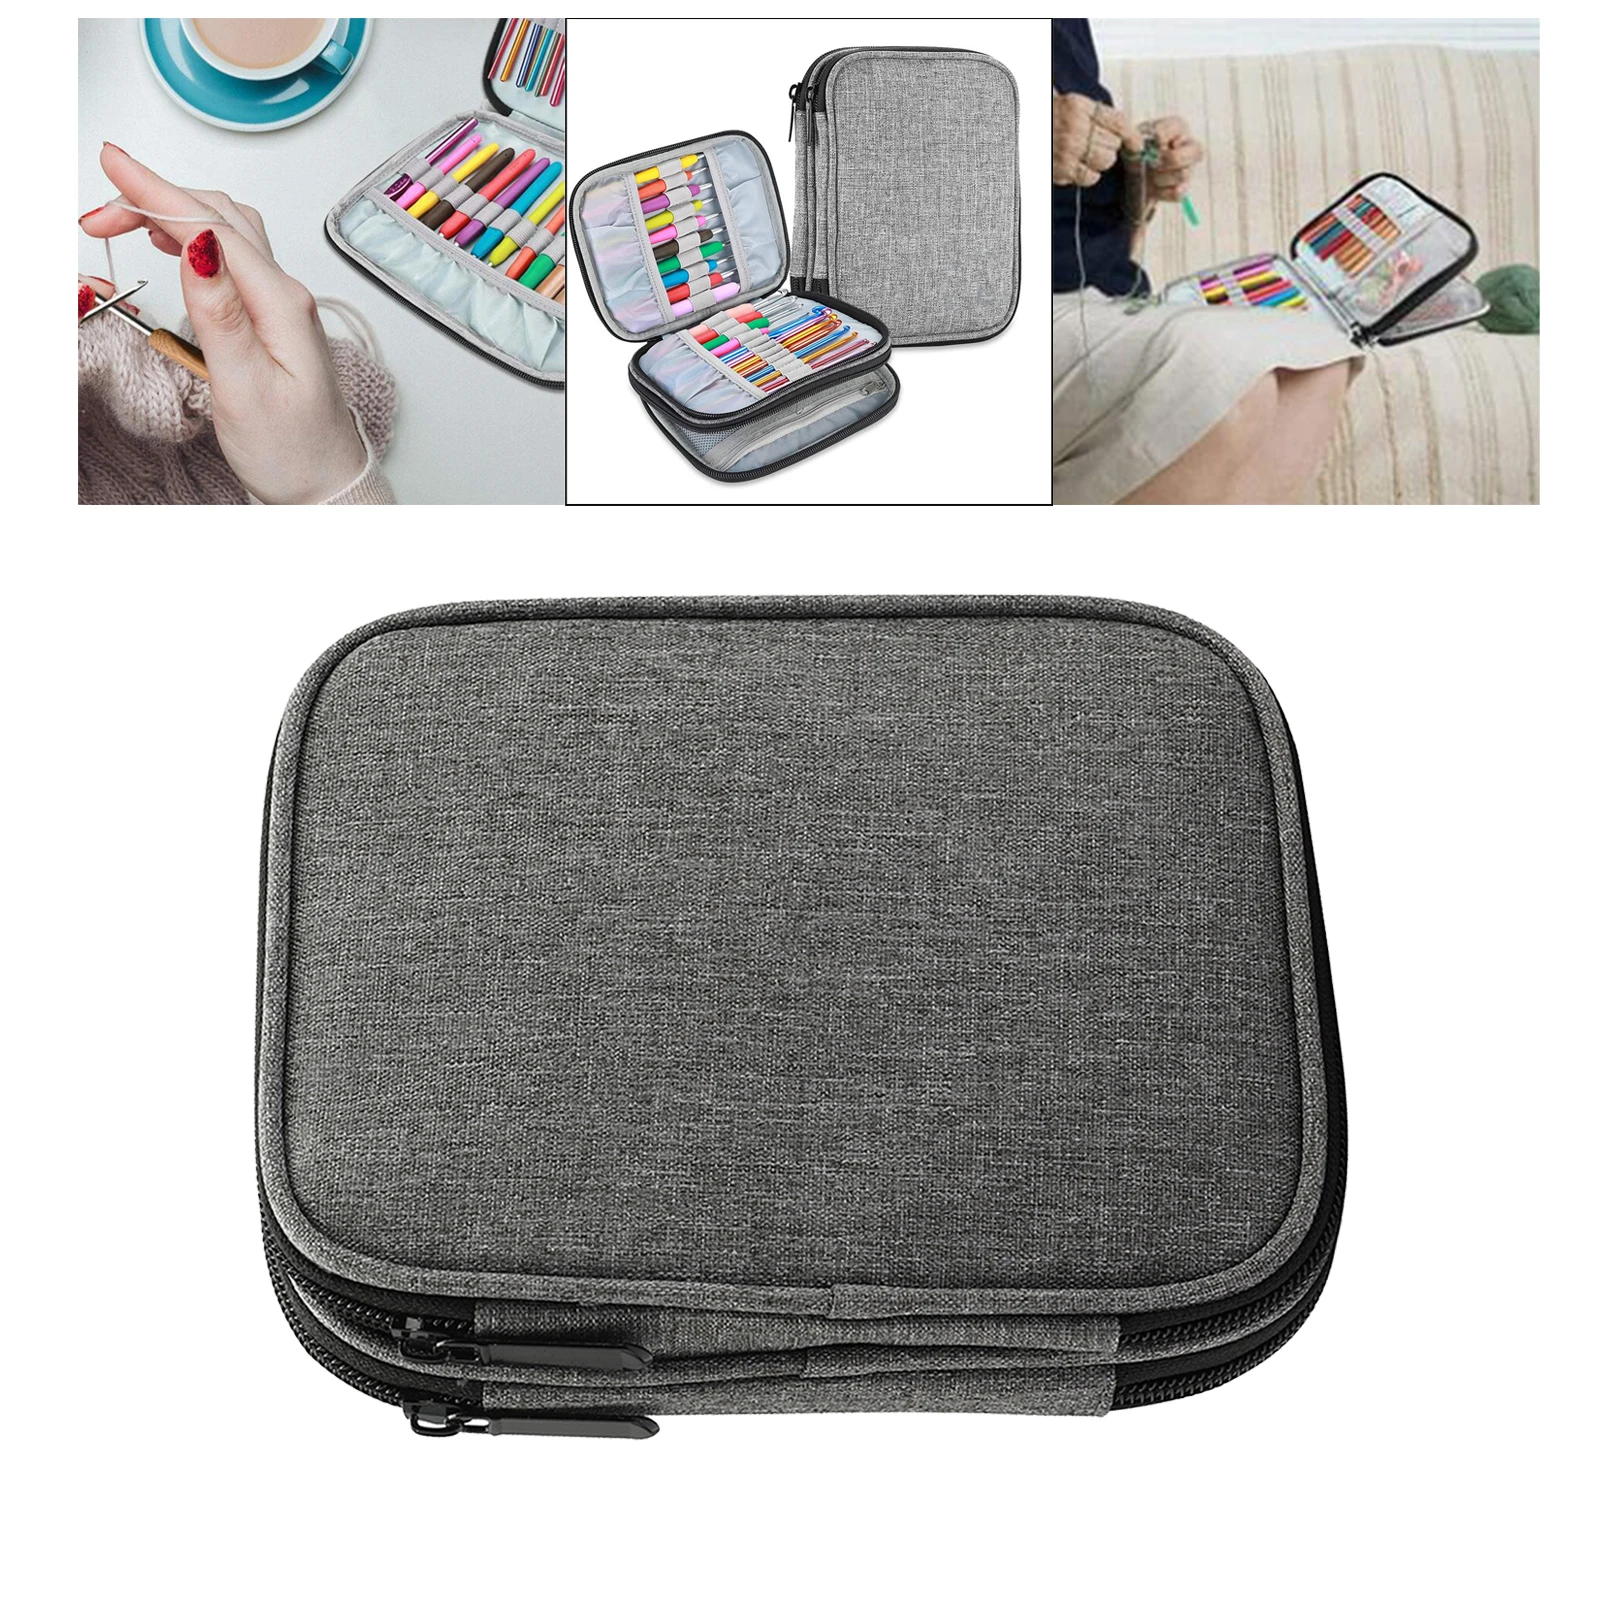 Oxford Crochet Hook Case Only Empty Zipper Bag Portable Travel Crochet Storage Bag with Web Pocket for Carrying Crochet Needles